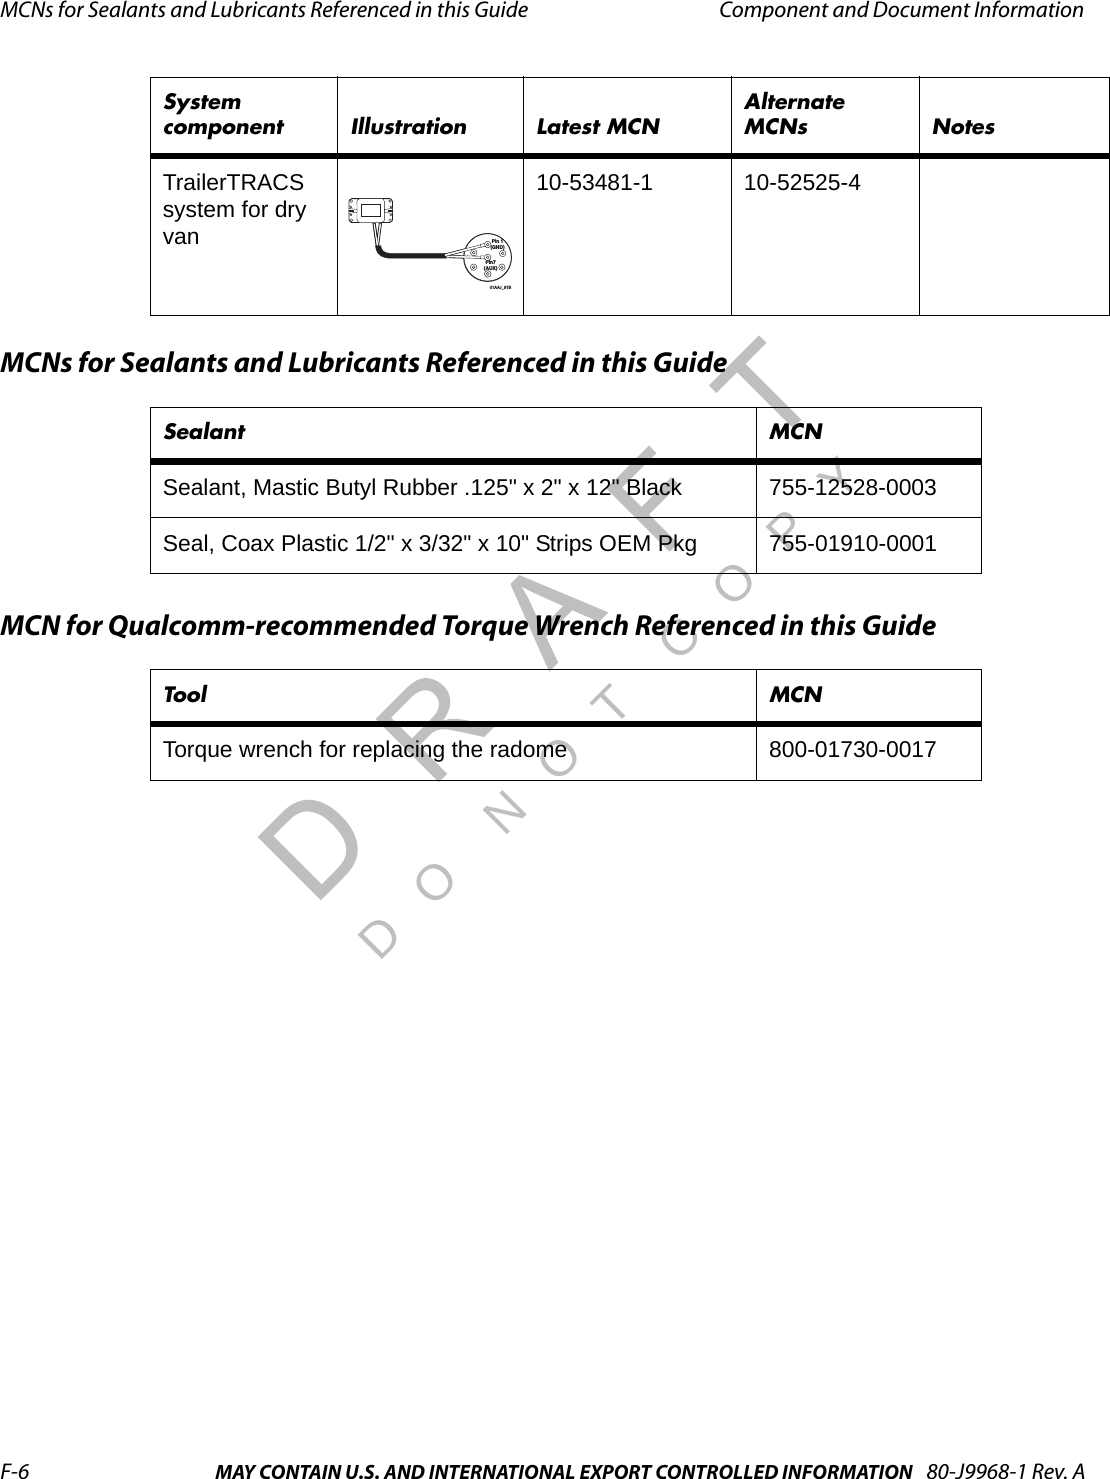 MCNs for Sealants and Lubricants Referenced in this Guide Component and Document InformationF-6 MAY CONTAIN U.S. AND INTERNATIONAL EXPORT CONTROLLED INFORMATION 80-J9968-1 Rev. ADO NOT COPYMCNs for Sealants and Lubricants Referenced in this GuideMCN for Qualcomm-recommended Torque Wrench Referenced in this GuideTrailerTRACS system for dry van10-53481-1 10-52525-4Sealant MCNSealant, Mastic Butyl Rubber .125&quot; x 2&quot; x 12&quot; Black  755-12528-0003Seal, Coax Plastic 1/2&quot; x 3/32&quot; x 10&quot; Strips OEM Pkg 755-01910-0001Tool MCNTorque wrench for replacing the radome 800-01730-0017System component Illustration Latest MCNAlternate MCNs NotesPin7(AUX)Pin 1(GND)01AAJ_81B 